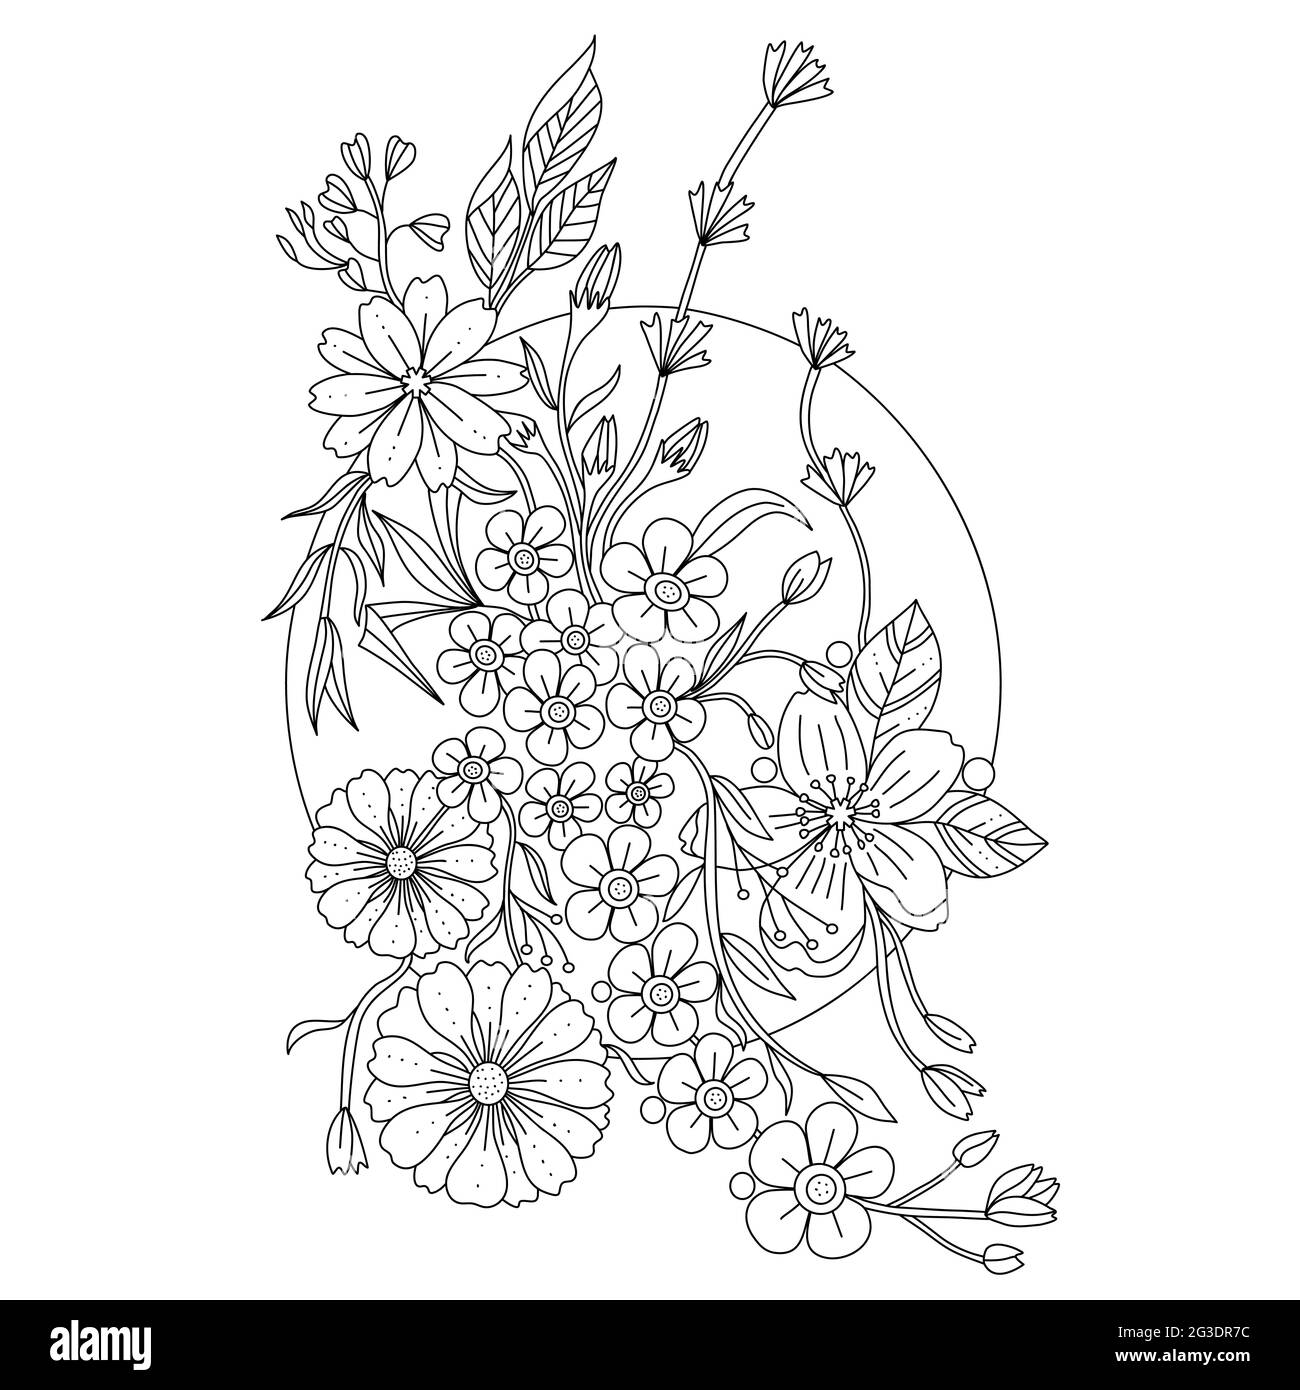 Outline doodle flowers in black and white for adult coloring books, monocrome floral vector pattern. Page of floral mandala. Stock Vector